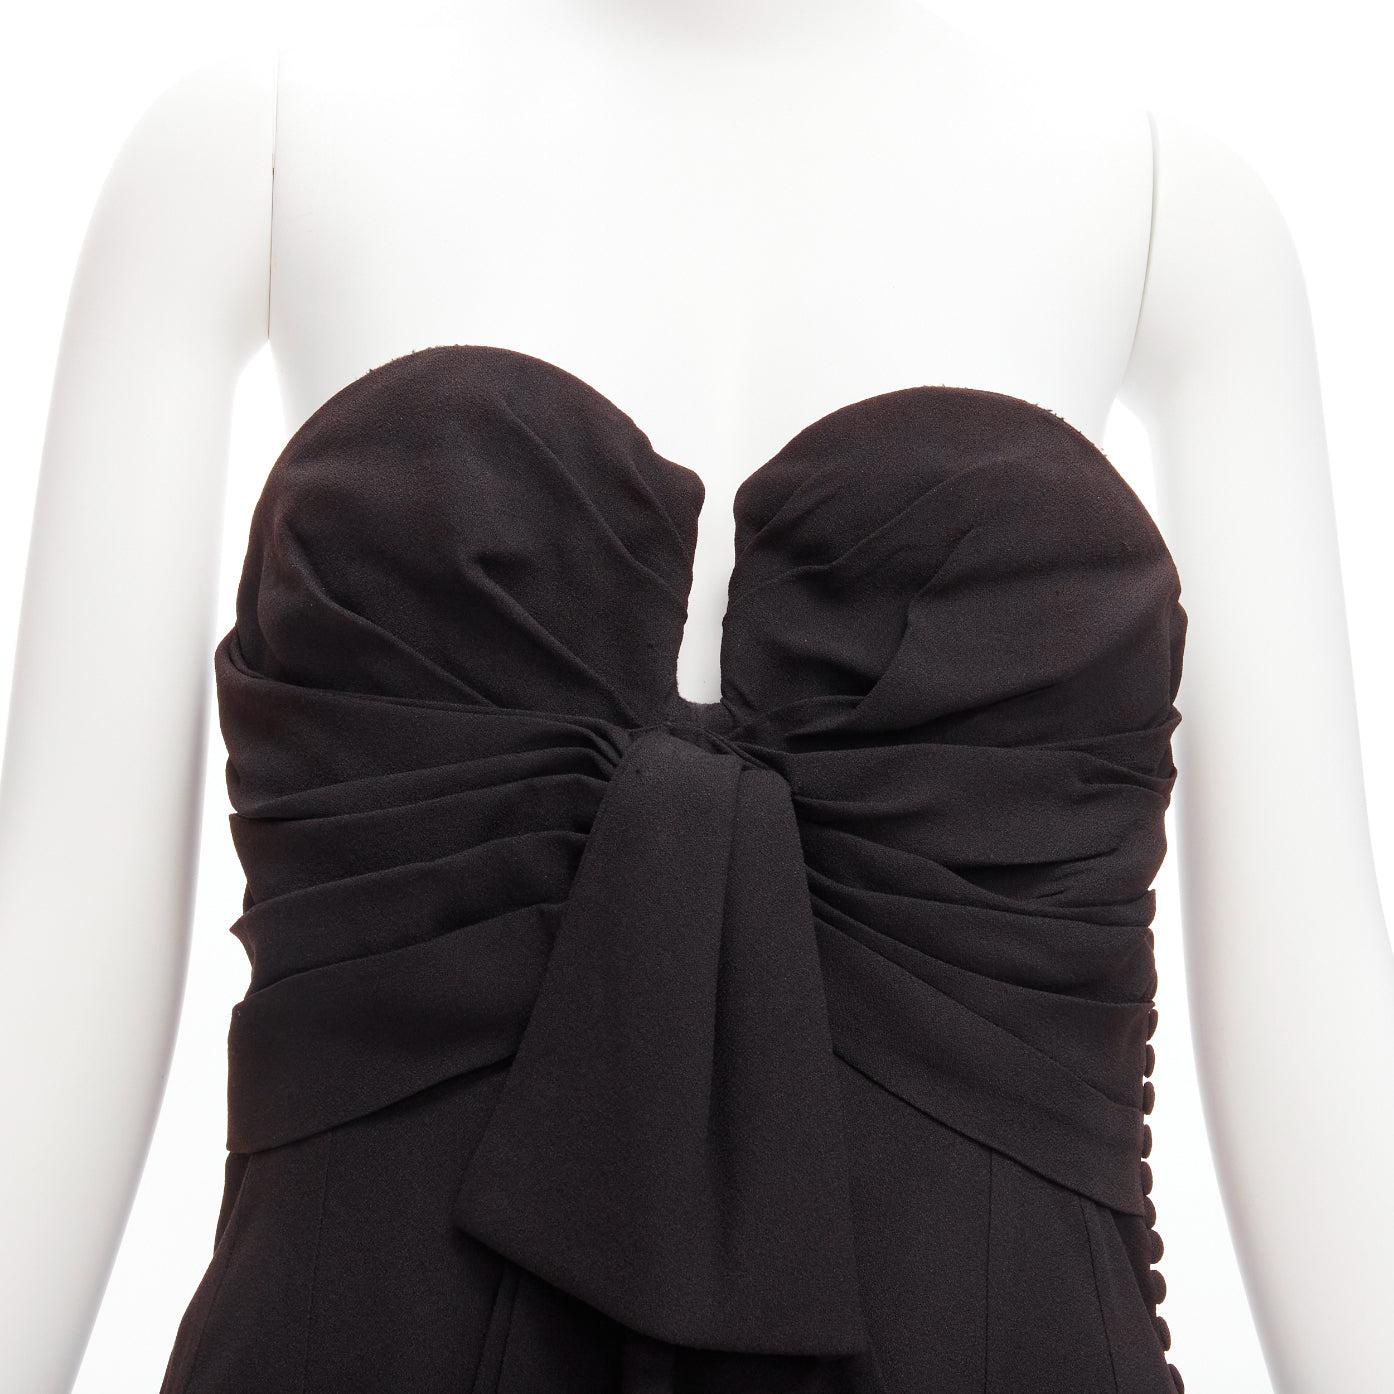 CHRISTIAN DIOR John Galliano Vintage U wired neckline strapless goddess dress FR38 M
Reference: TGAS/D00364
Brand: Christian Dior
Designer: John Galliano
Material: Acetate, Viscose
Color: Black
Pattern: Solid
Closure: Button
Lining: Black